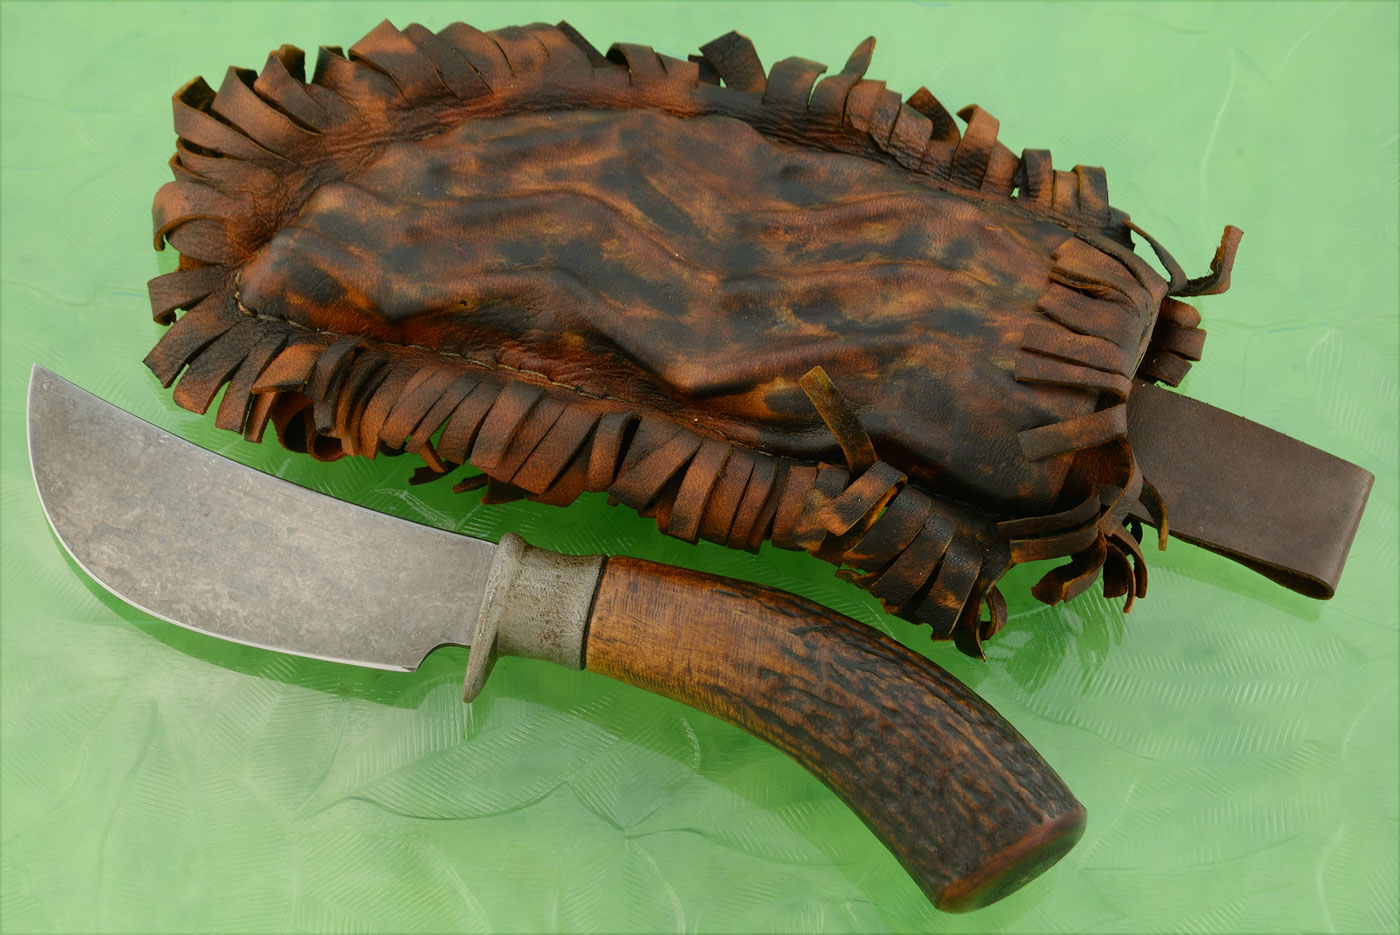 Upswept Skinner with Moose Antler and Wrought Iron